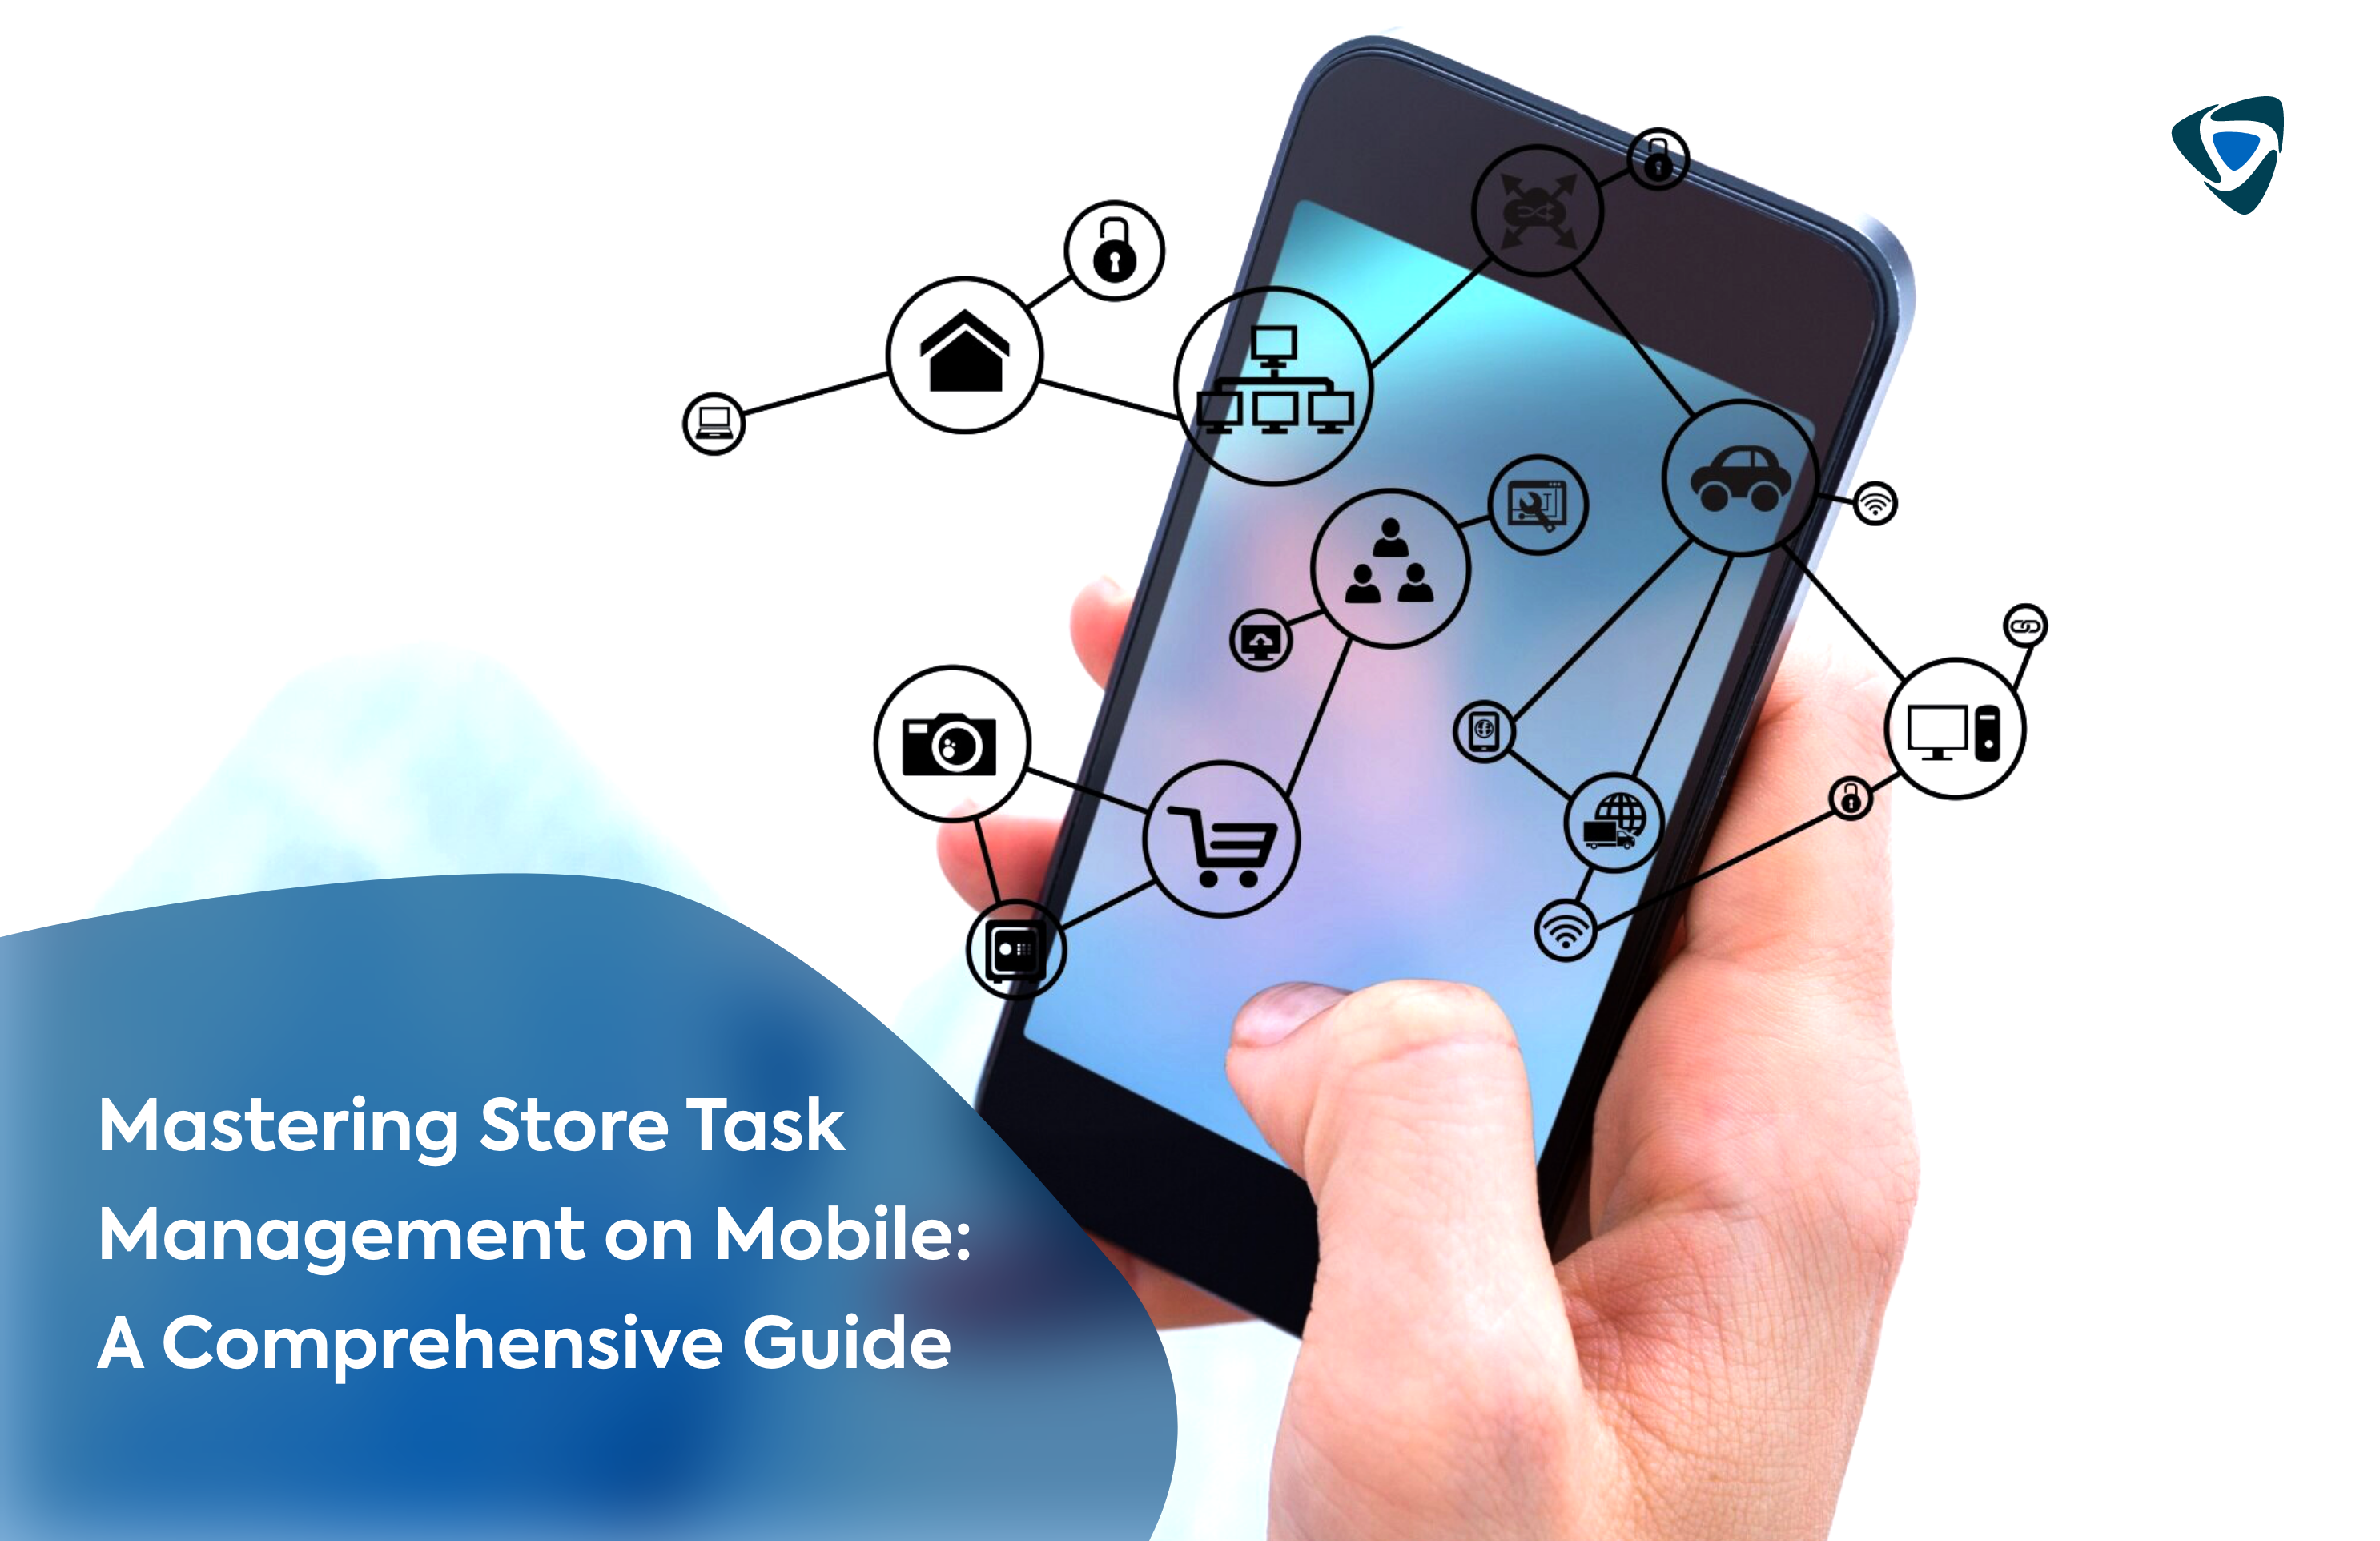 Mastering Store Task Management on Mobile: A Comprehensive Guide